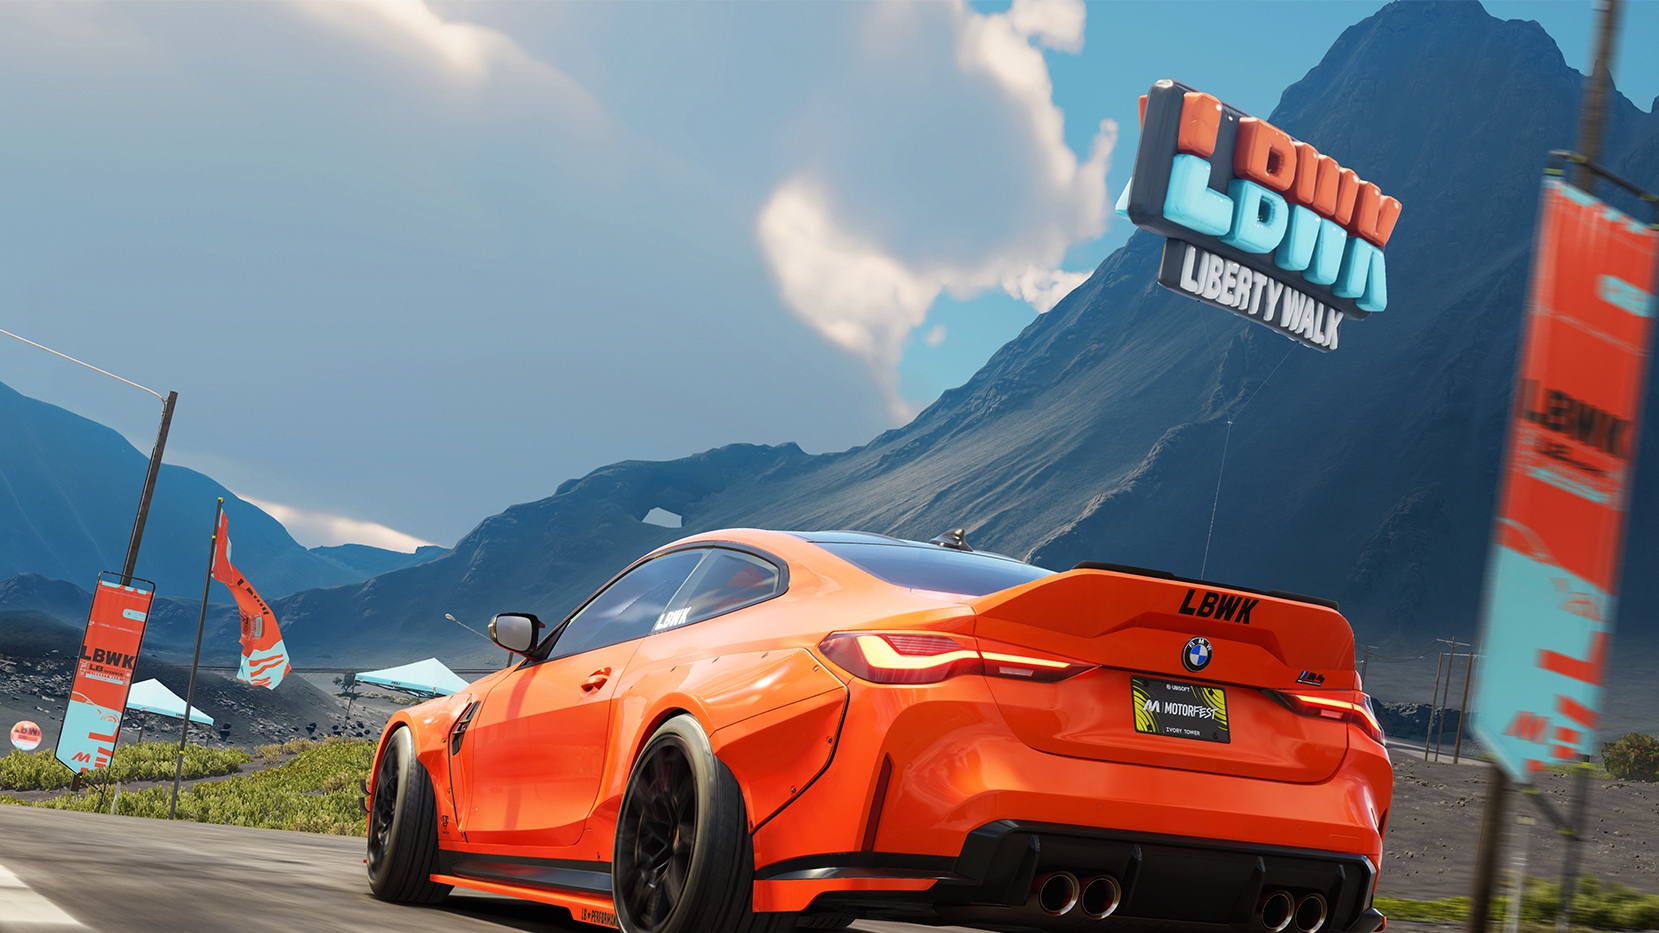 Review: The Crew Motorfest wants to be Forza Horizon so bad, but just can't  catch up